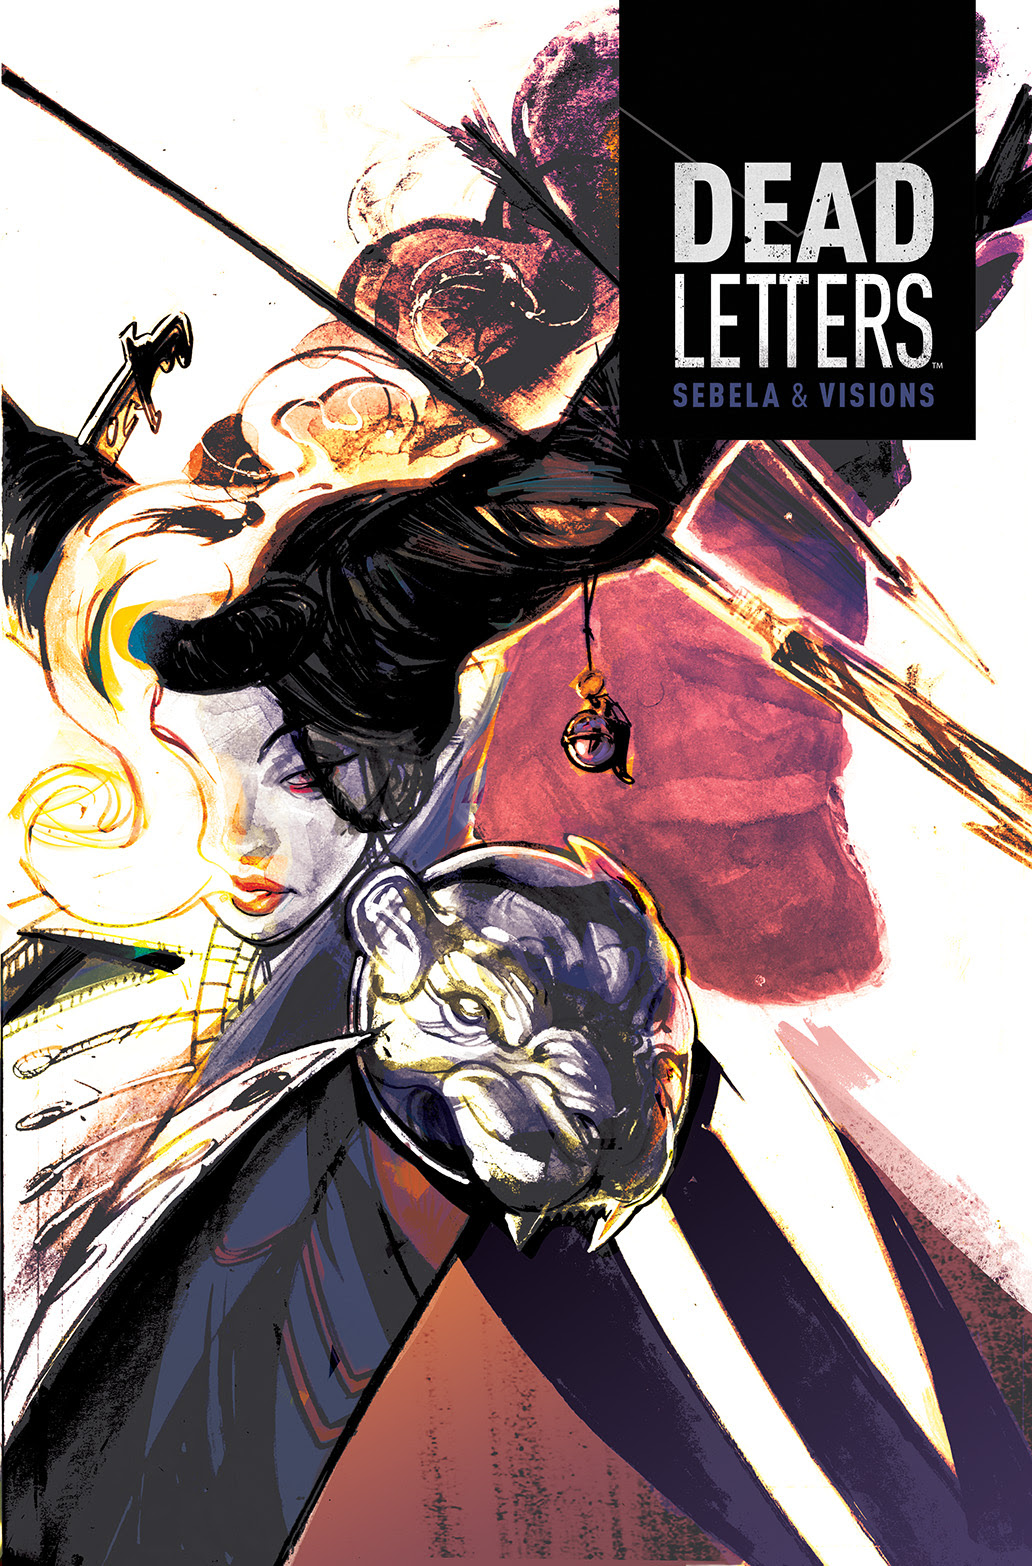 DEAD LETTERS #3 Cover A by Chris Visions